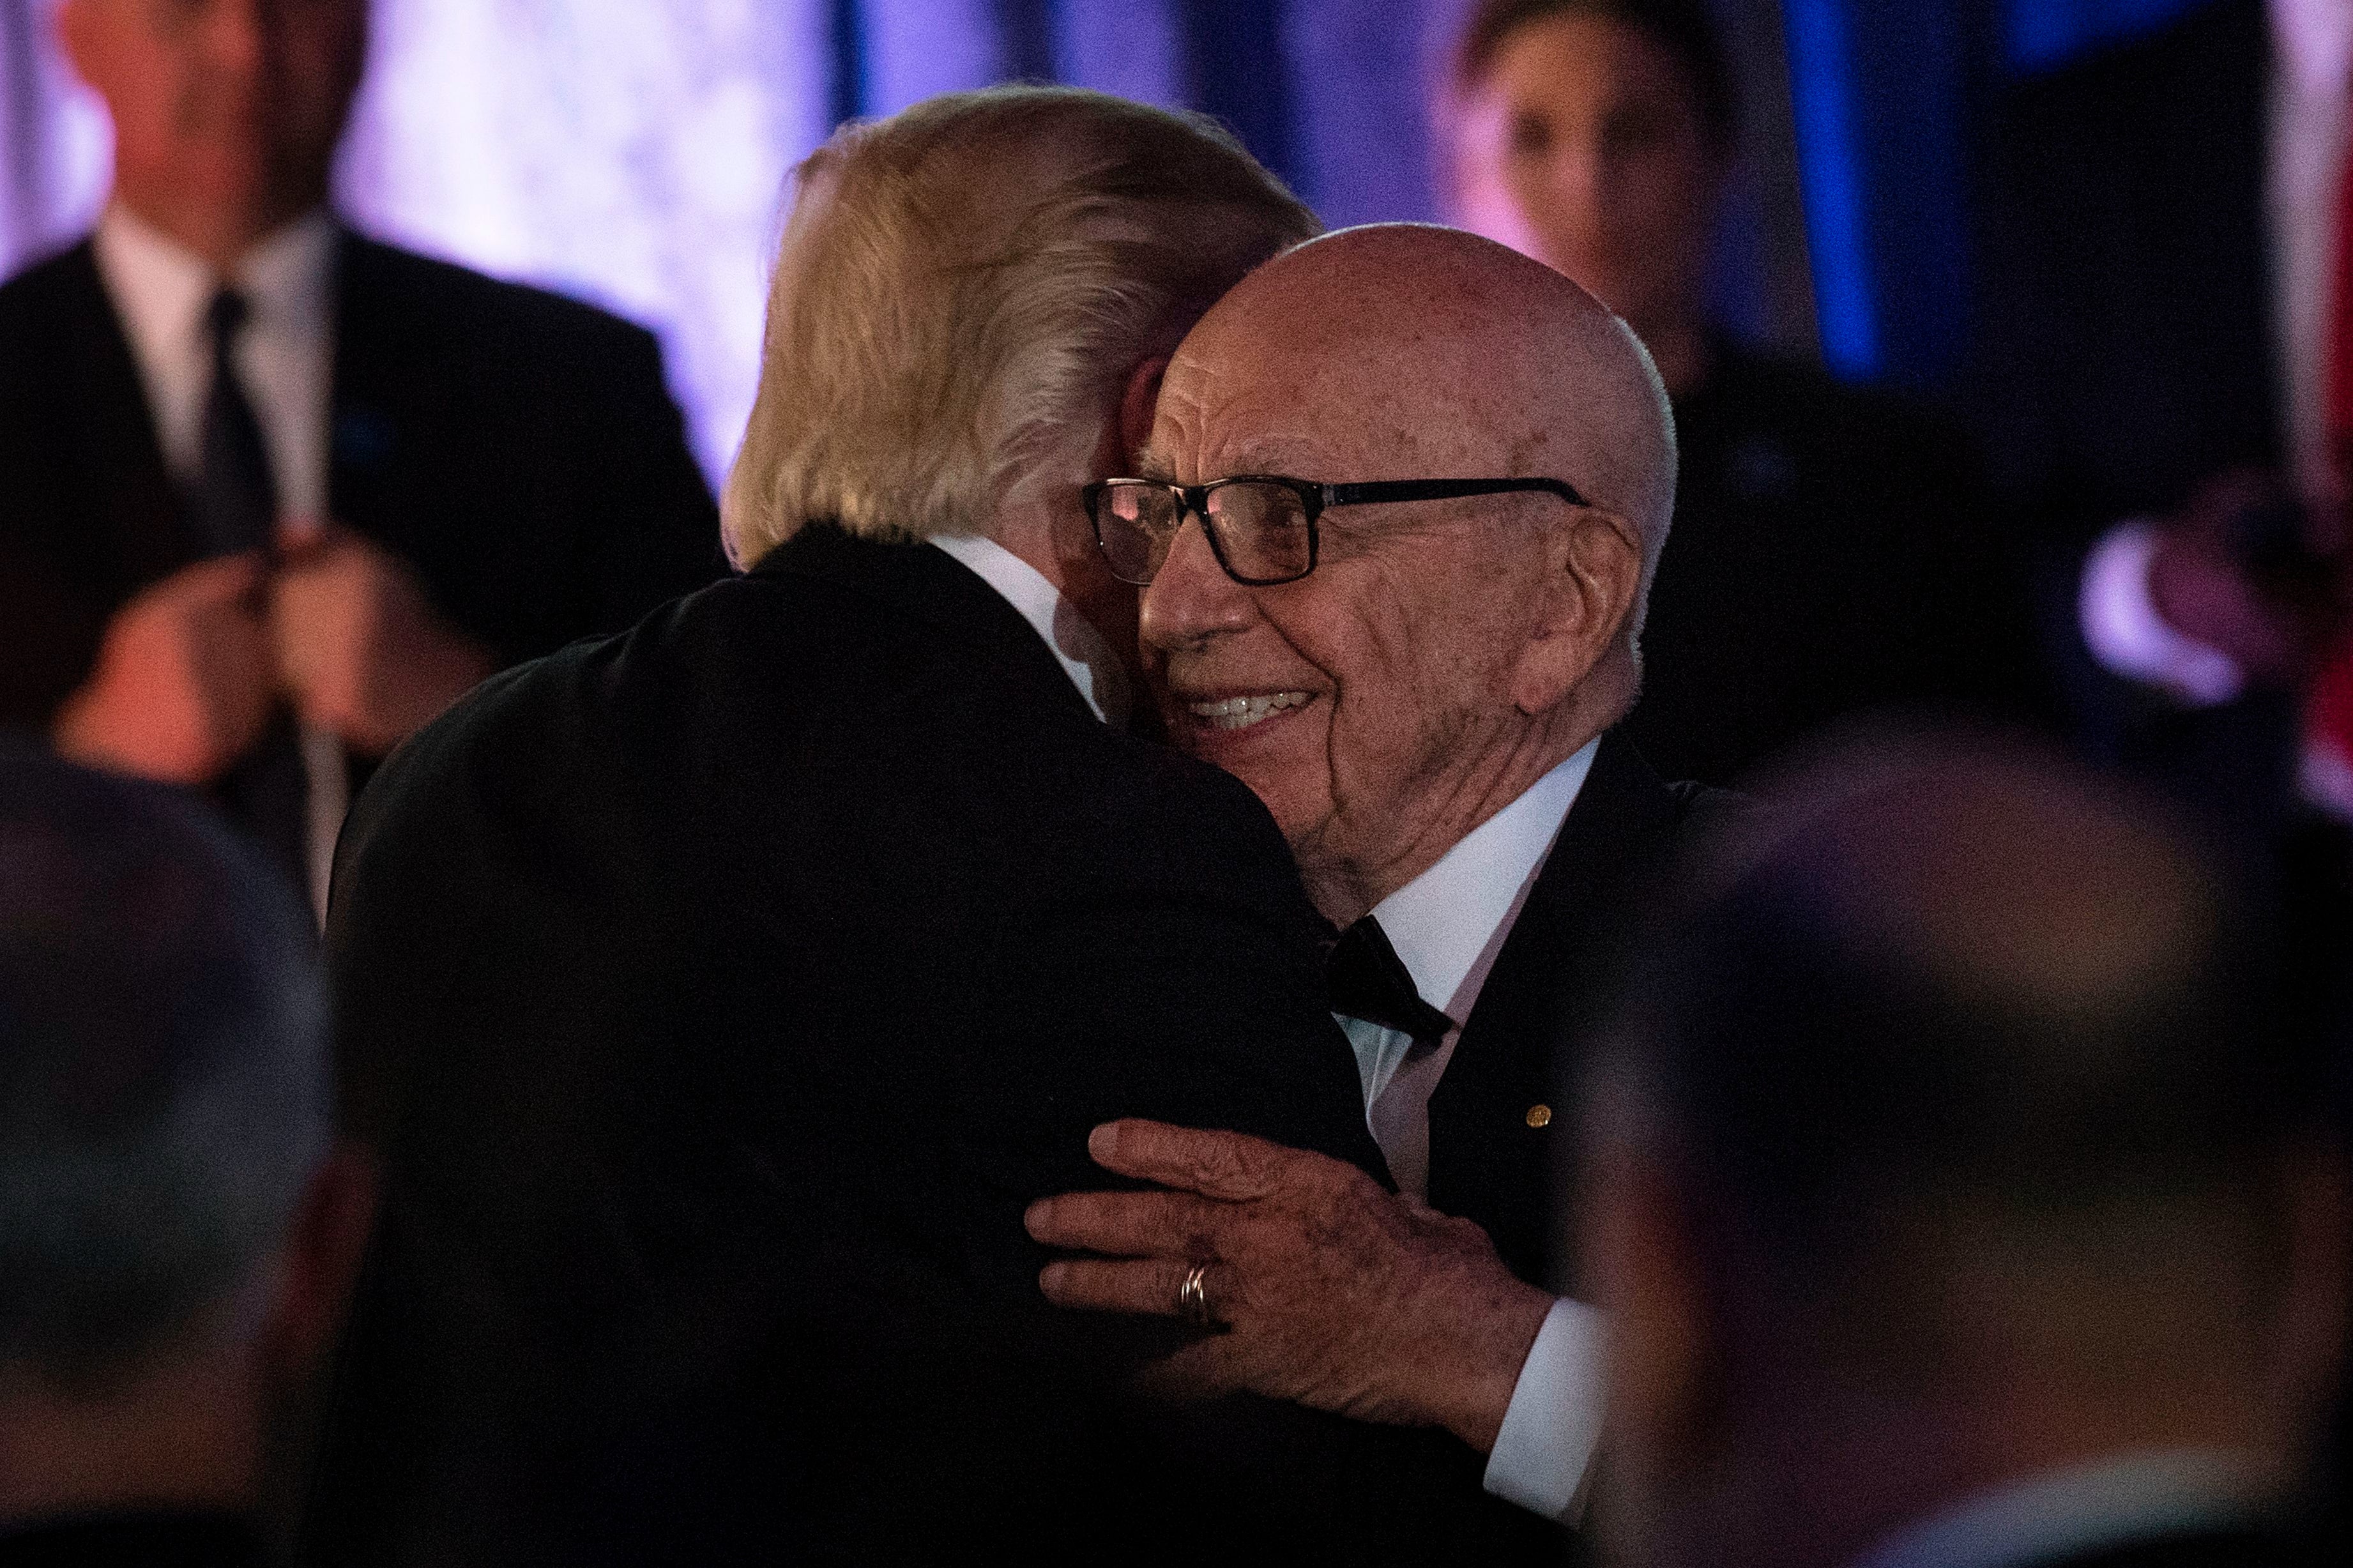 US President Donald Trump (L) is embraced by Rupert Murdoch, Executive Chairman of News Corp, during a dinner to commemorate the 75th anniversary of the Battle of the Coral Sea during WWII